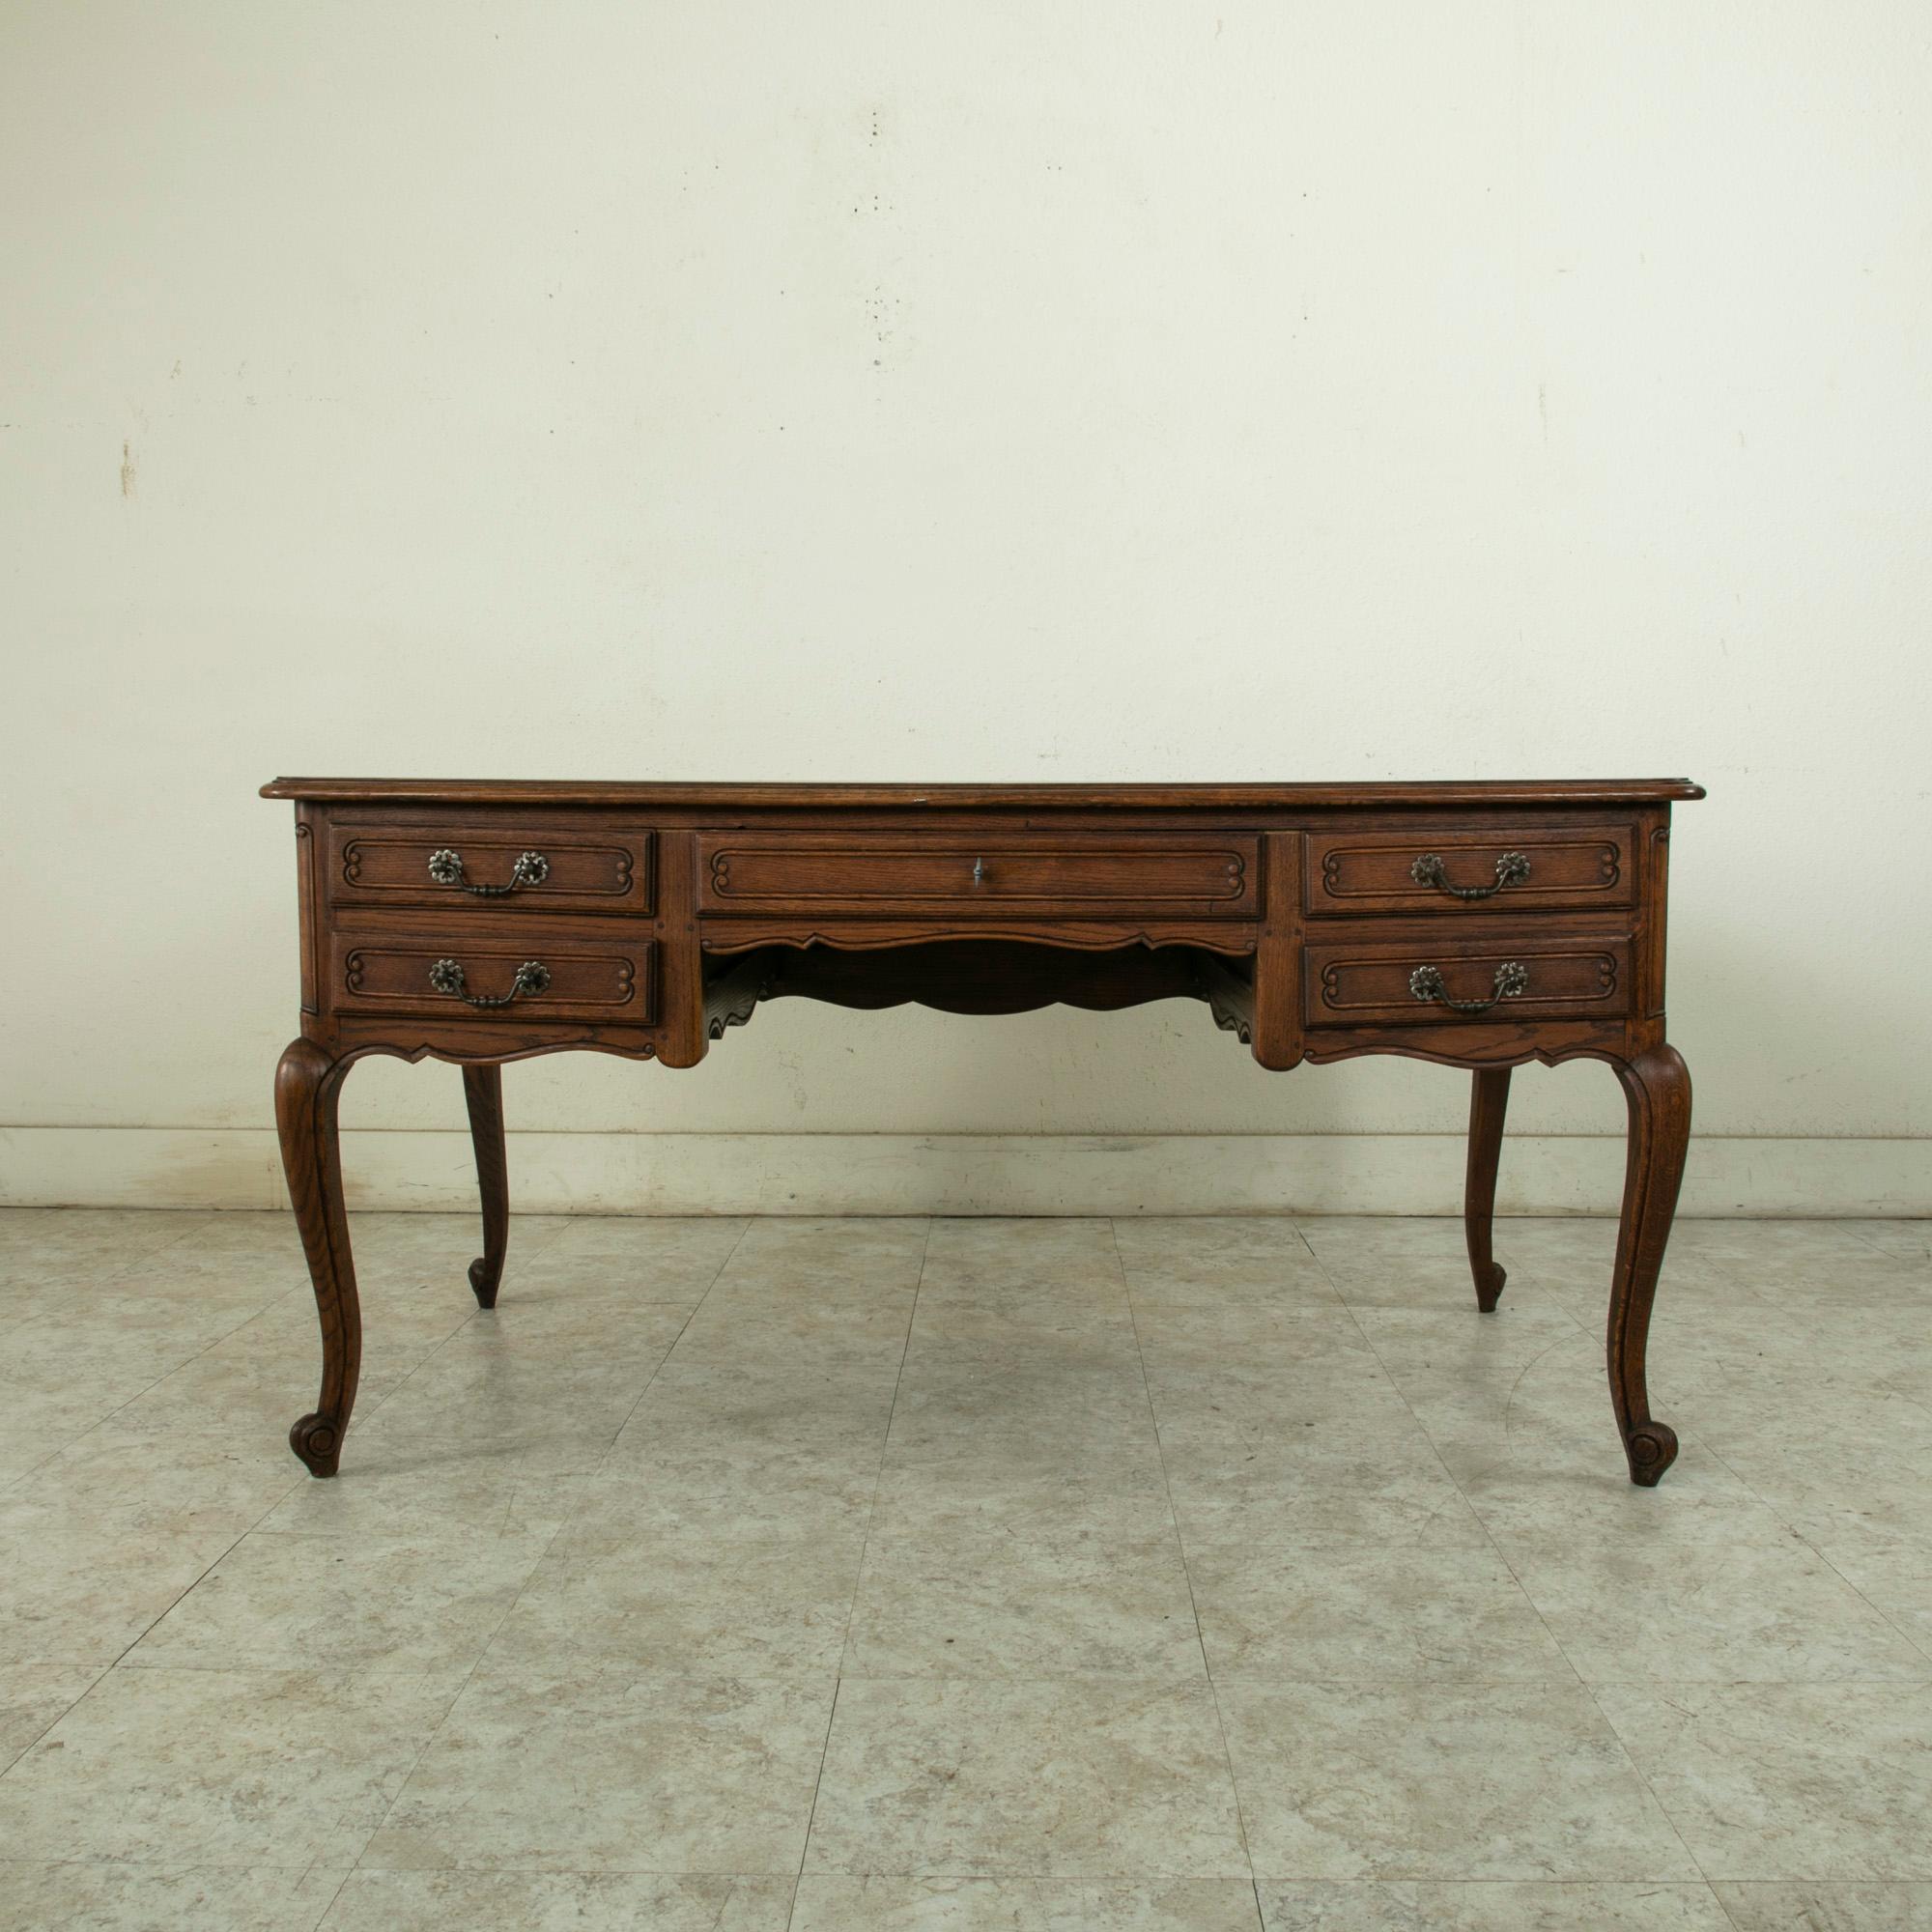 This mid-twentieth century French Louis XV style oak desk features a parquet top and hand pegged paneled sides. The desk is fitted with five drawers of dovetail construction each appointed with an iron drawer pull. The central drawer may be locked